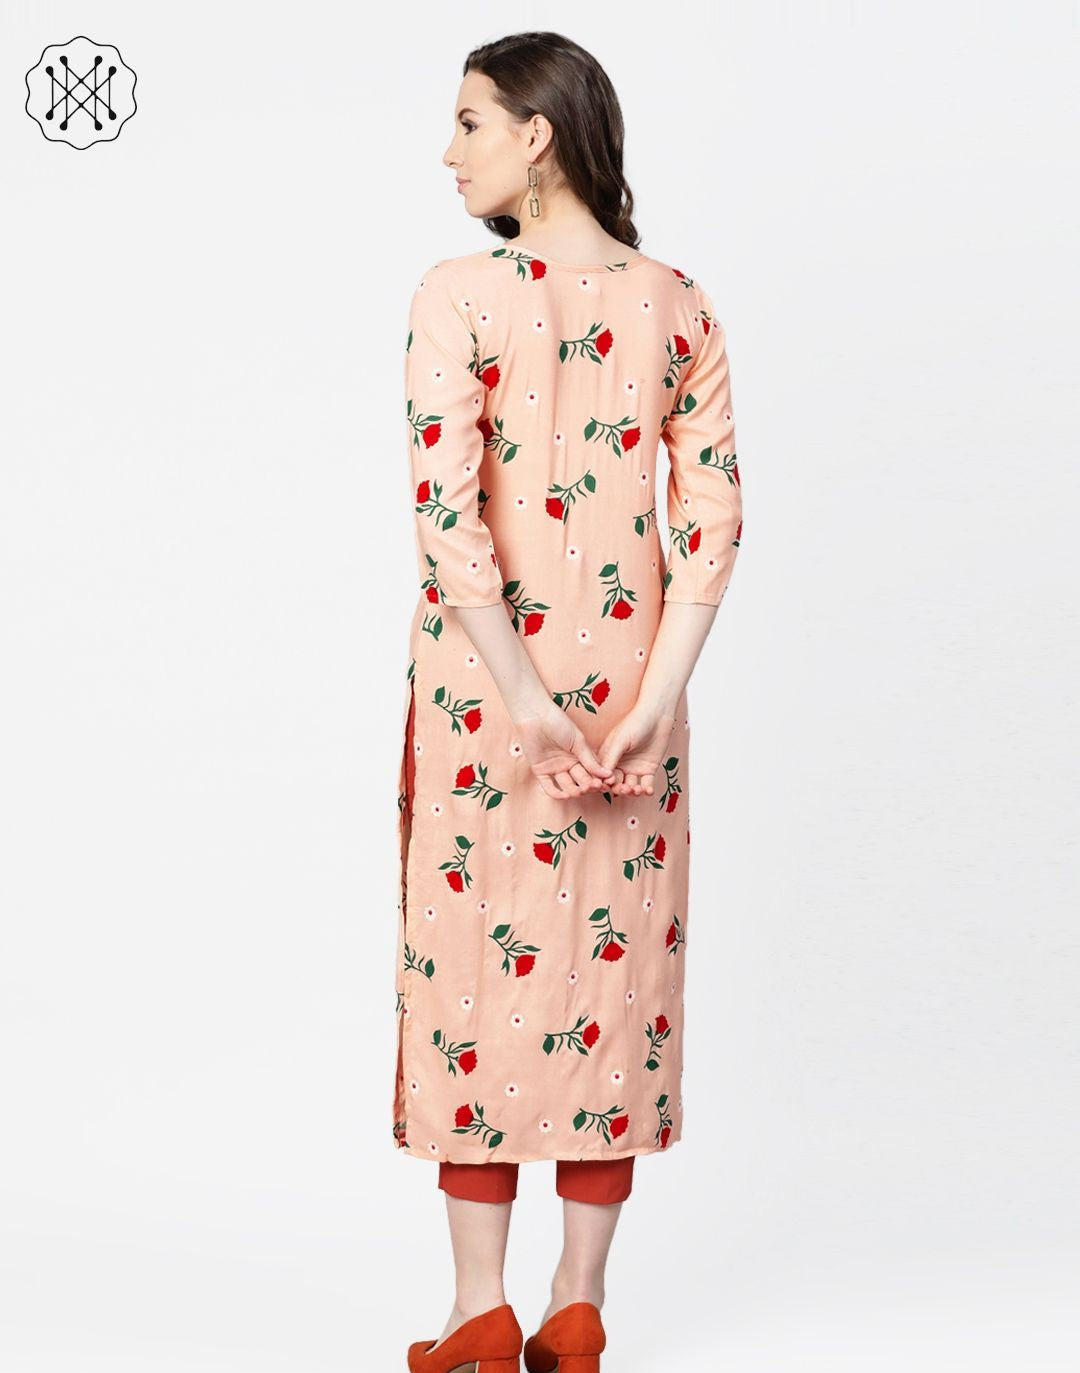 Peach Multi colored Floral printed Straight Kurta with Round neck & 3/4 sleeves